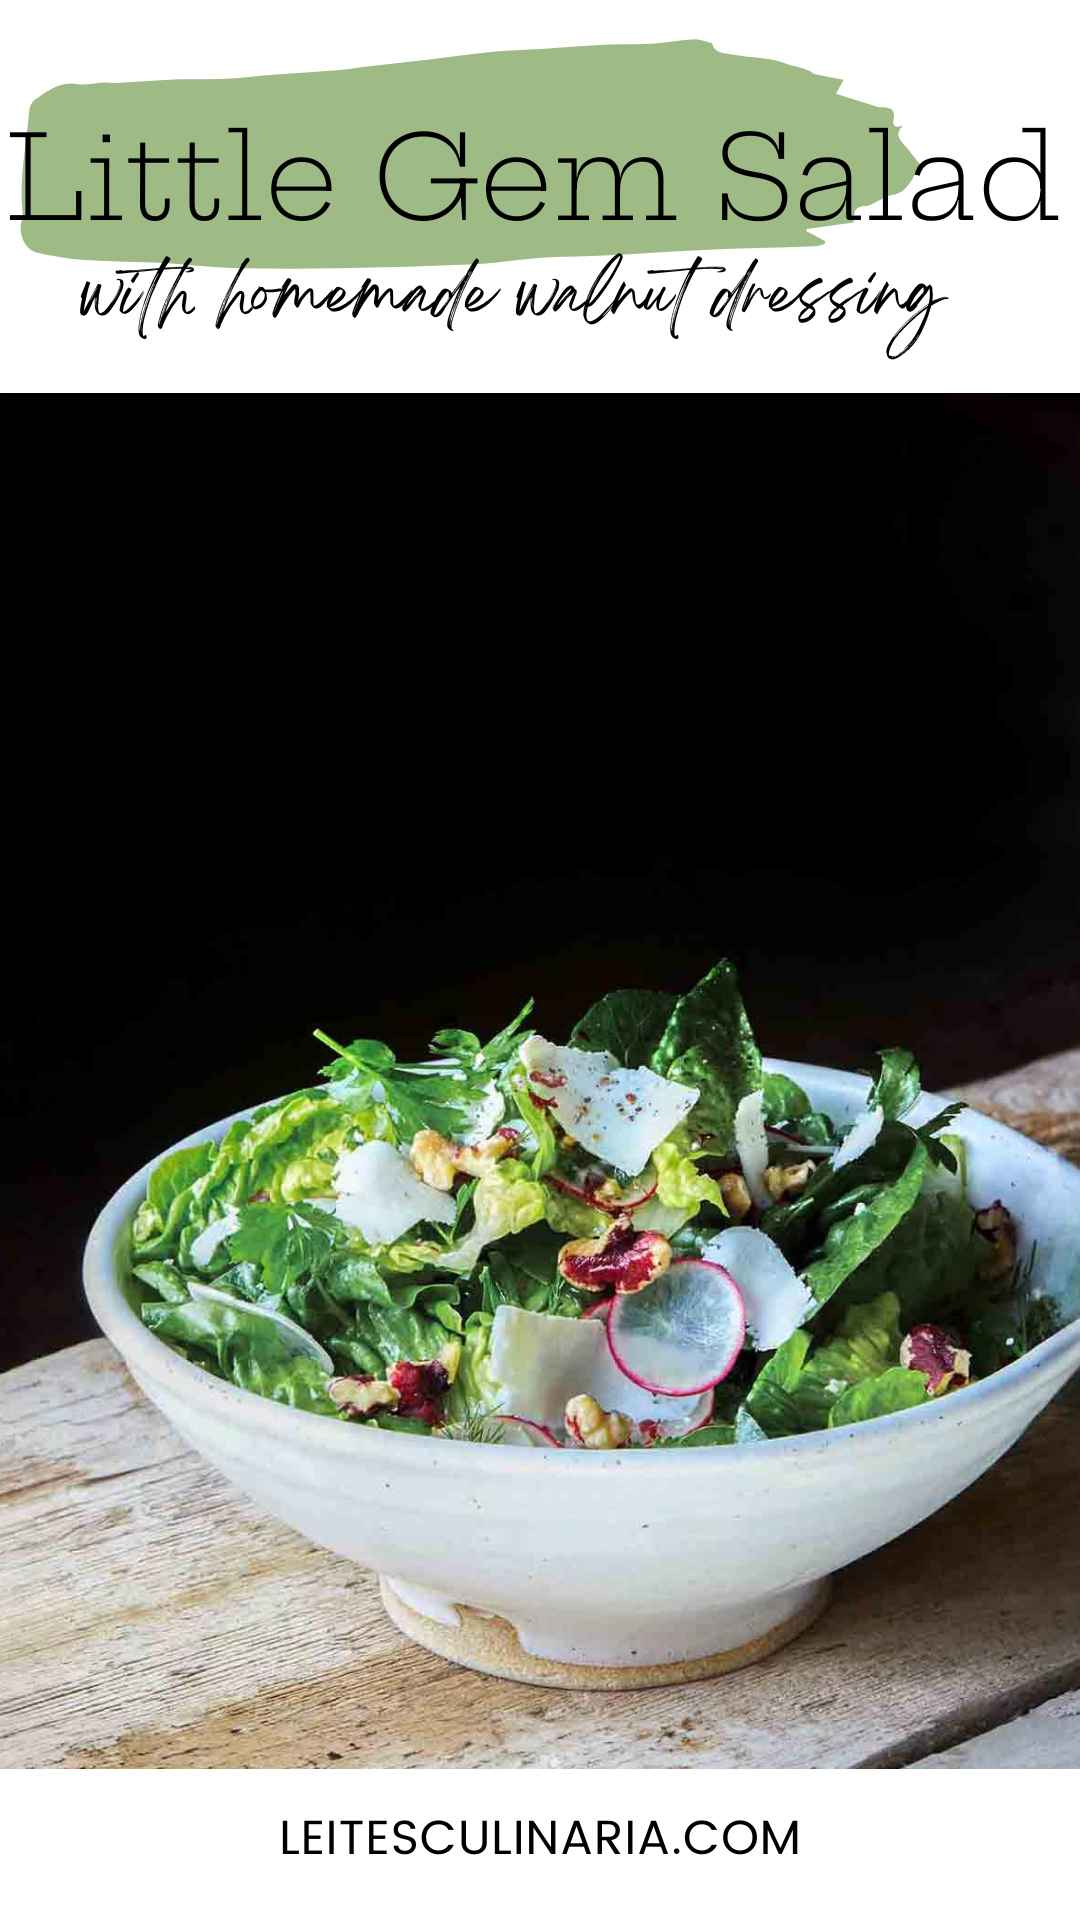 A white bowl filled with little gem lettuce, radishes, walnuts, and parmesan shavings.